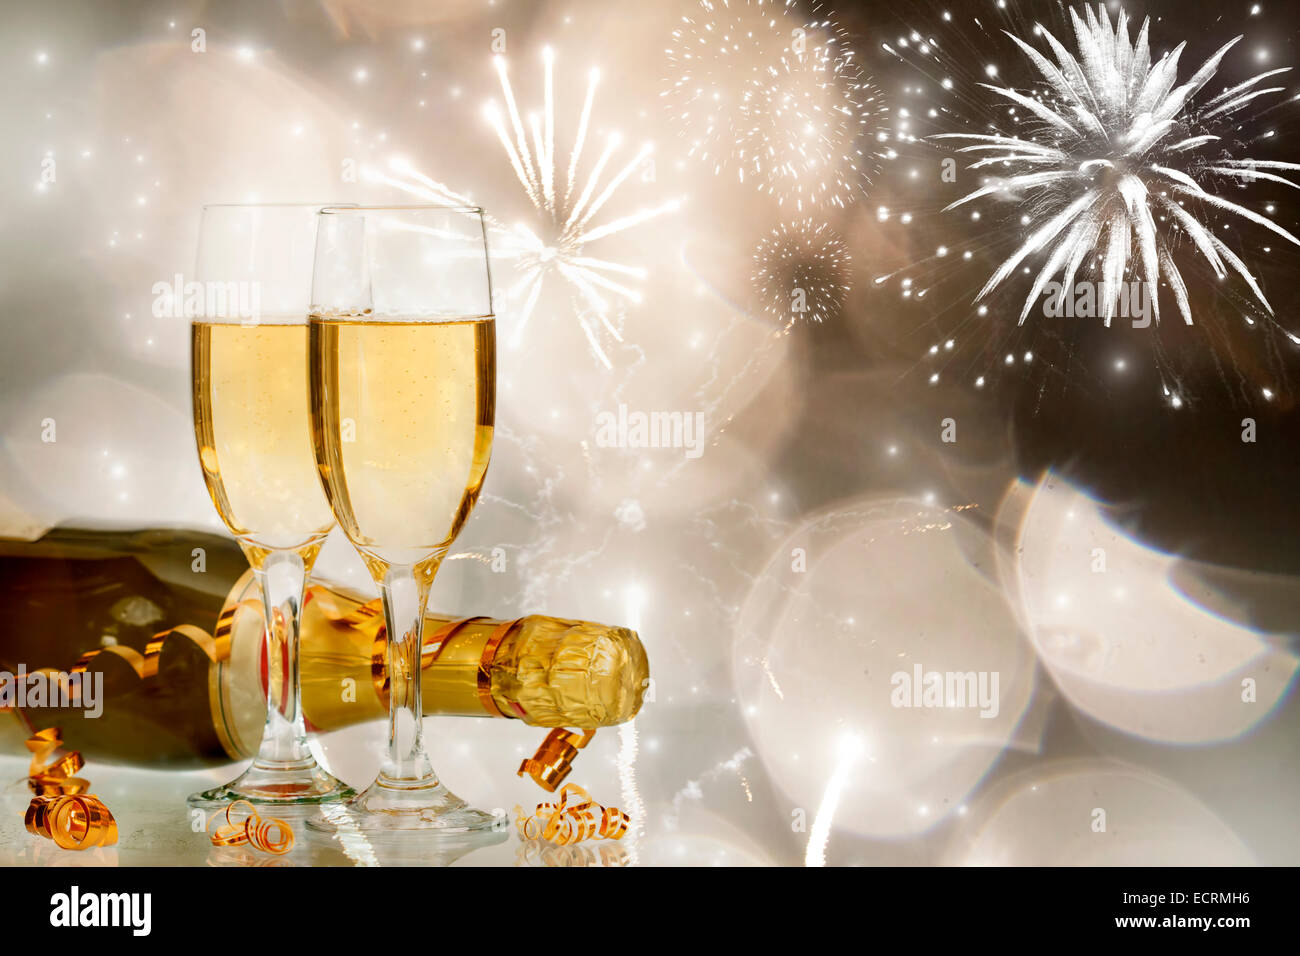 Glasses with champagne and bottle over fireworks and sparkling holiday background Stock Photo